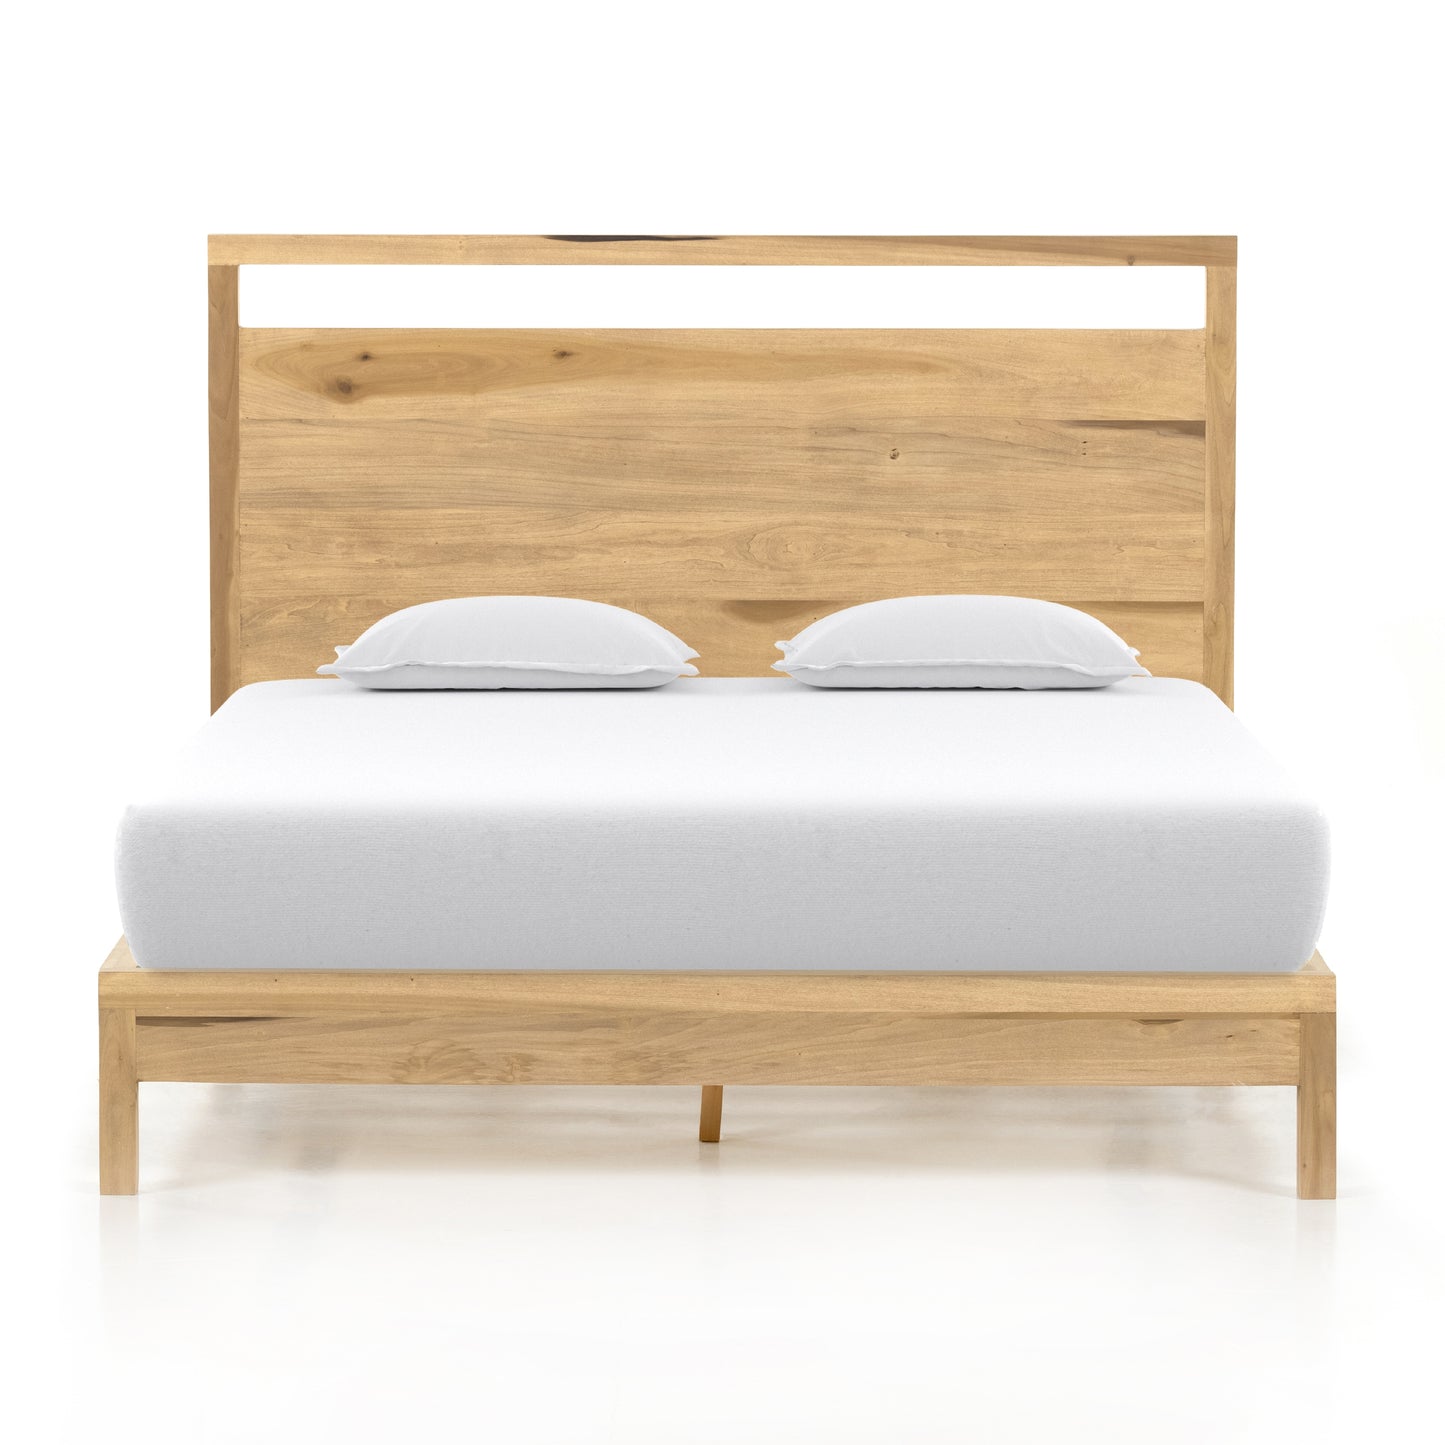 Load image into Gallery viewer, Isador Bed Beds Four Hands     Four Hands, Burke Decor, Mid Century Modern Furniture, Old Bones Furniture Company, Old Bones Co, Modern Mid Century, Designer Furniture, https://www.oldbonesco.com/
